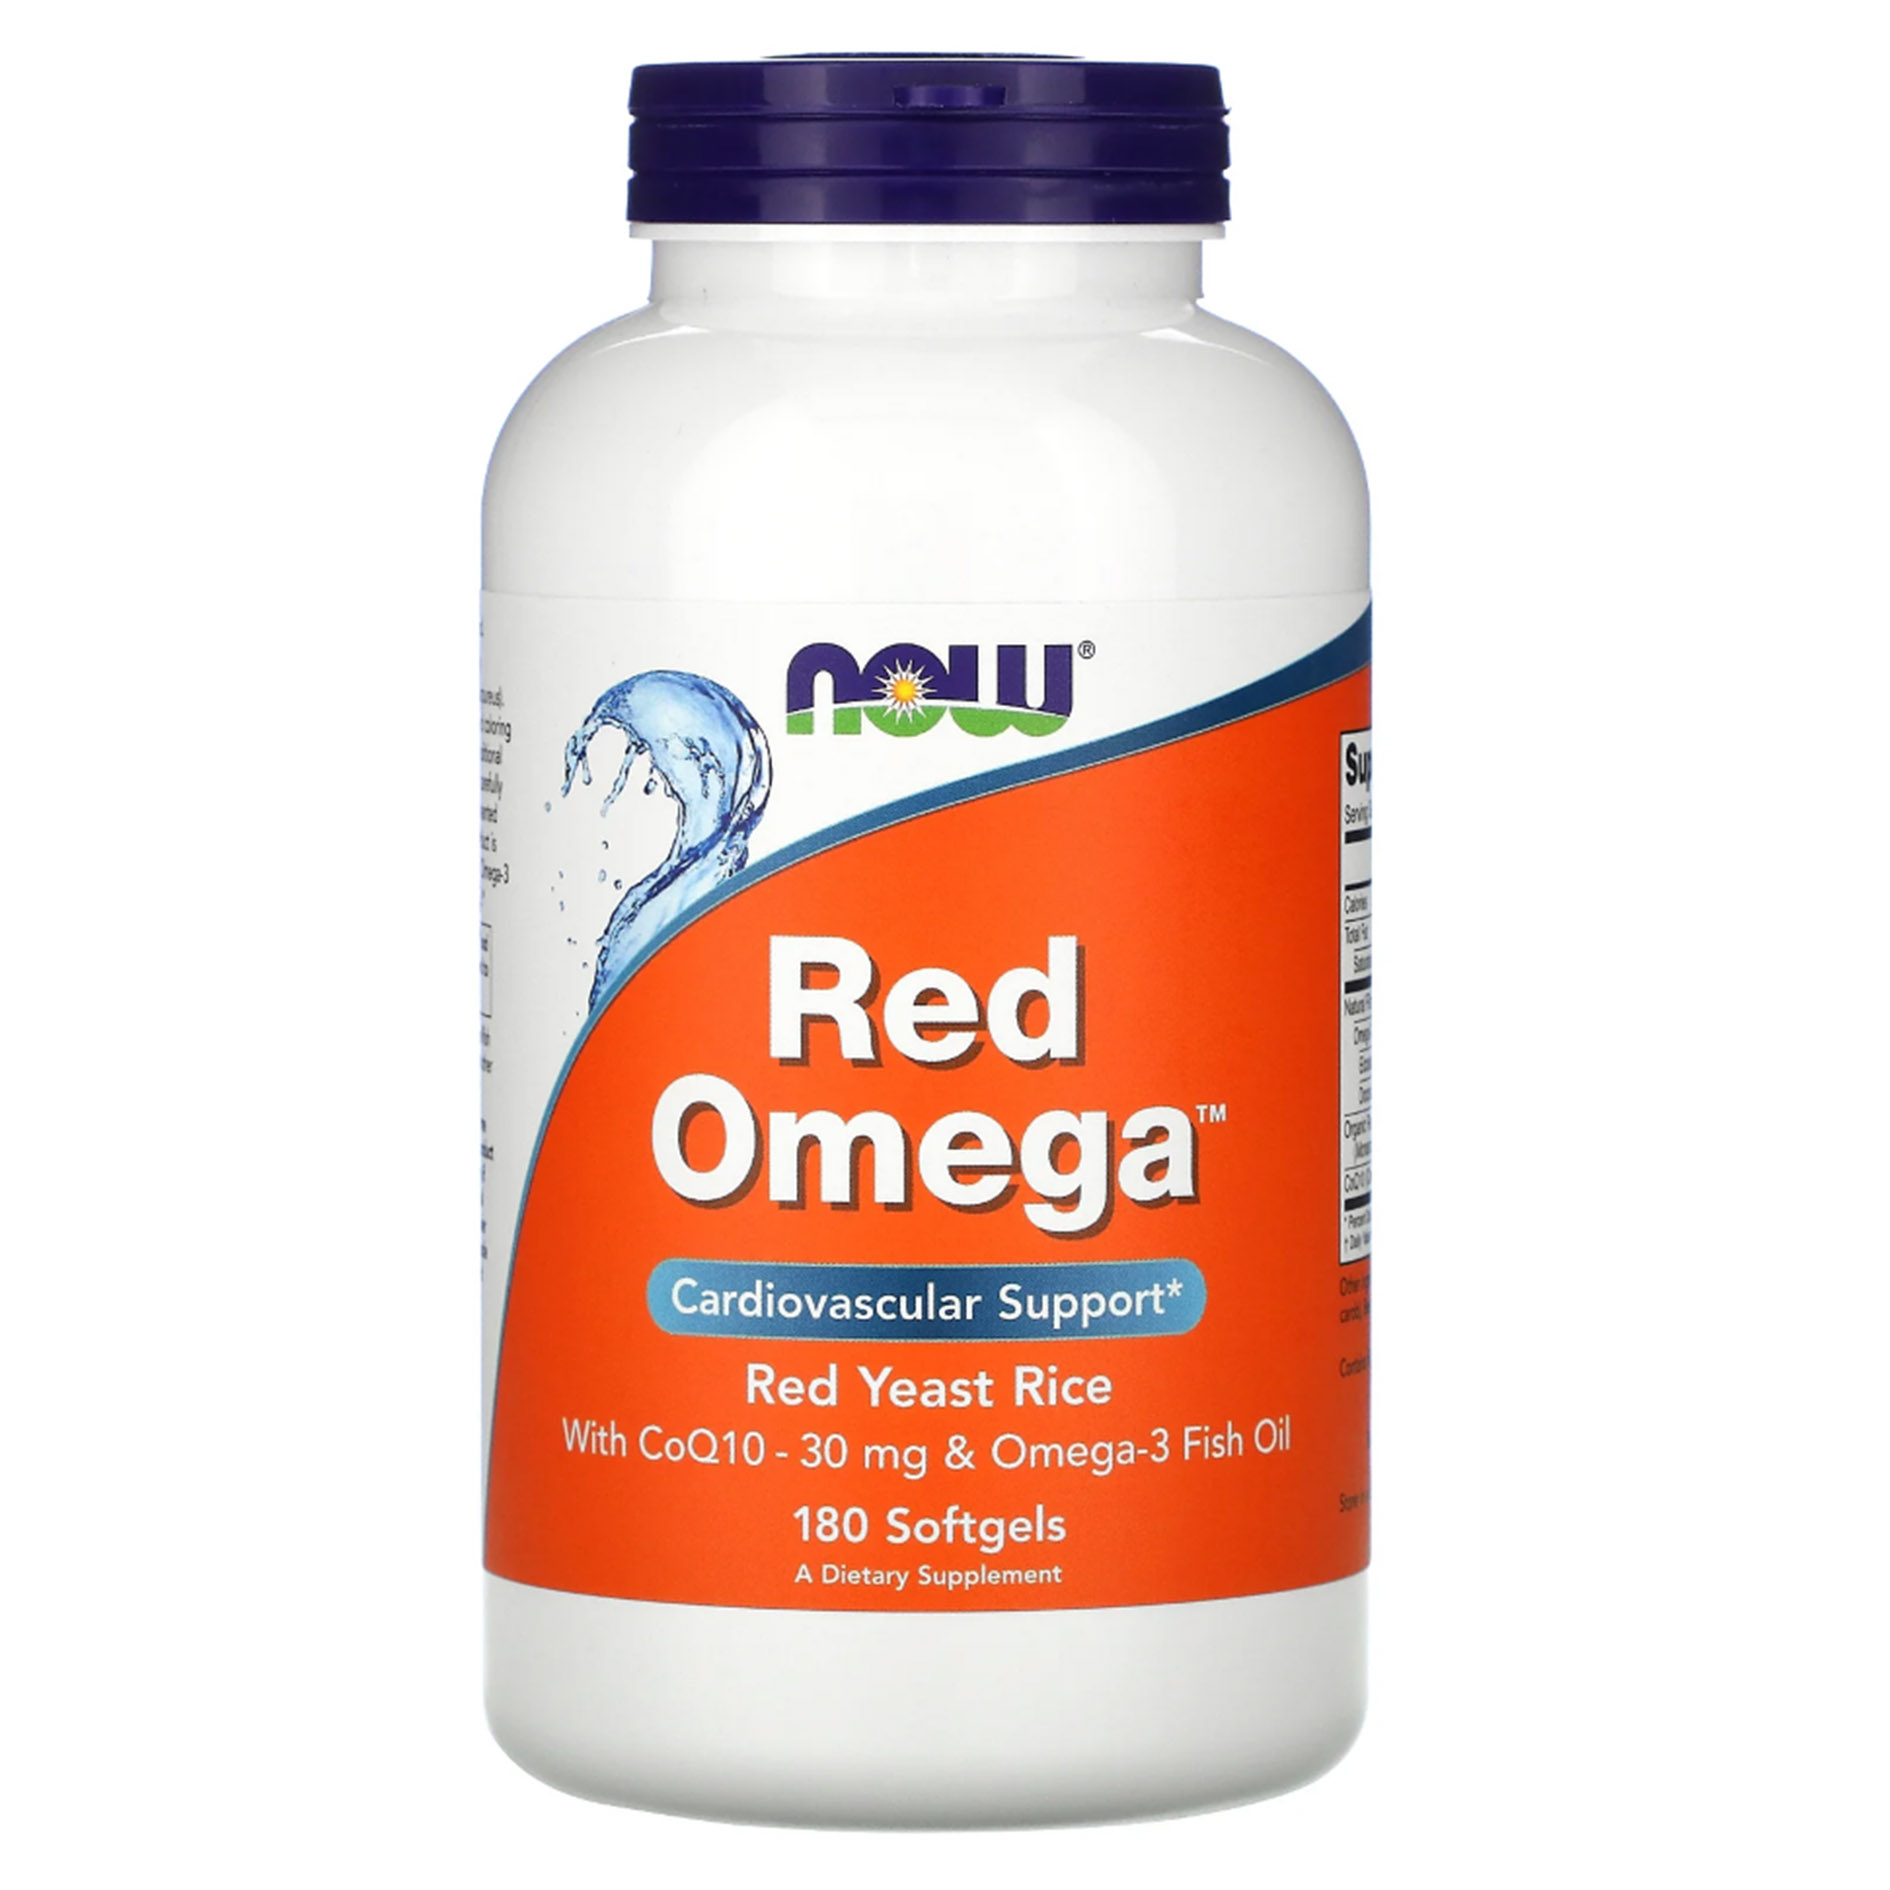 Now omega купить. Омега 3 коэнзим. Now foods, Red Omega. Red Omega БАД. Now Omega 3.